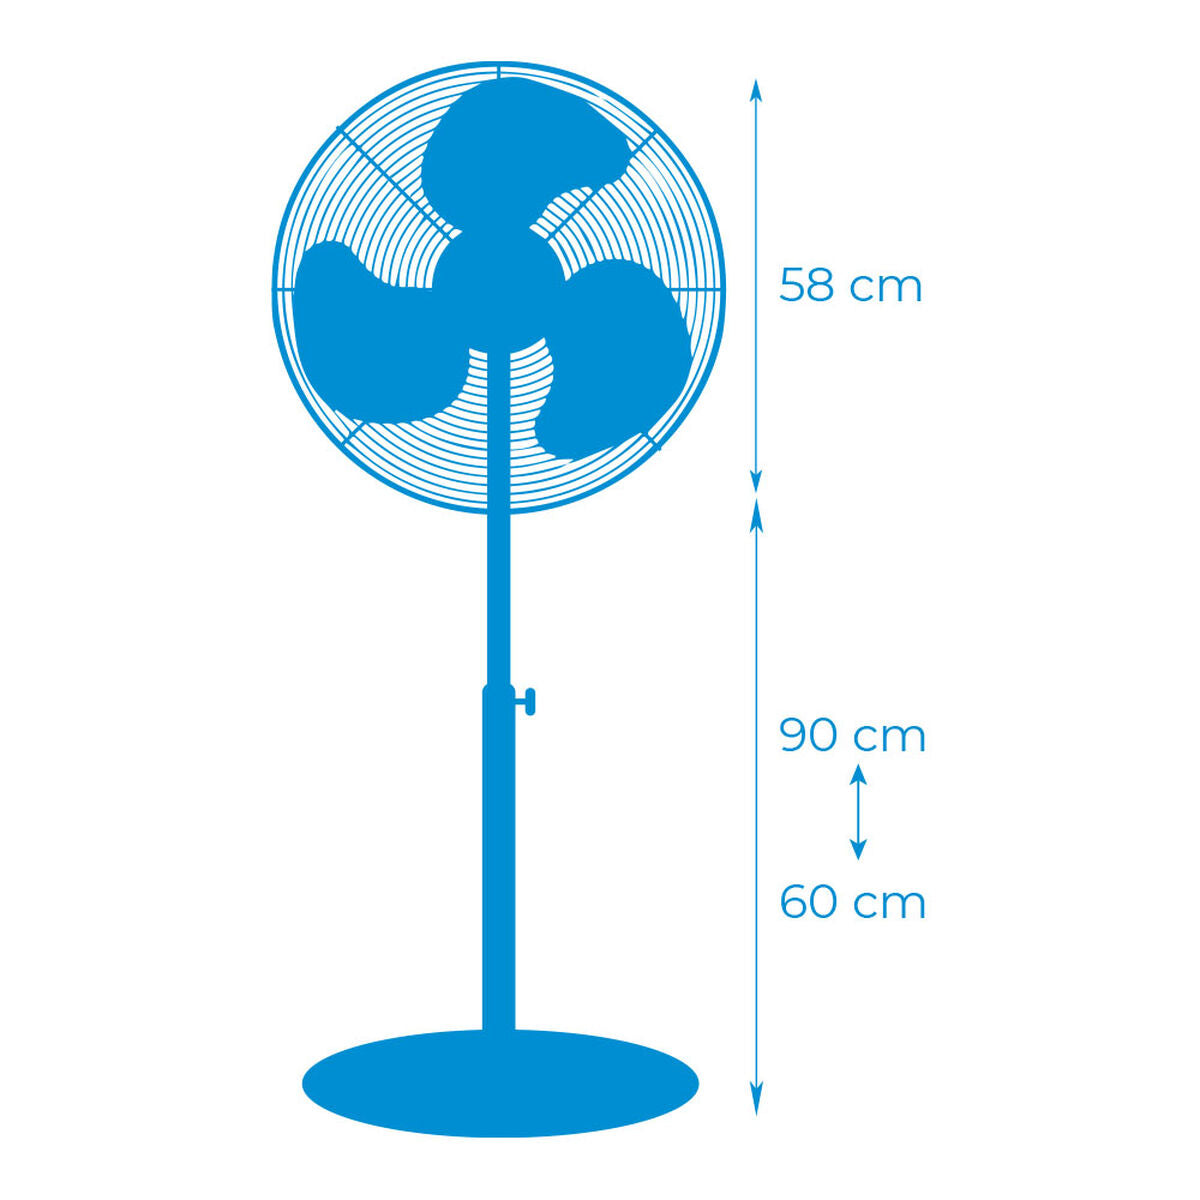 Freestanding Fan EDM Matte back 80 W Ø 50 cm industrial, EDM, Home and cooking, Portable air conditioning, freestanding-fan-edm-matte-back-80-w-o-50-cm-industrial, Brand_EDM, category-reference-2399, category-reference-2450, category-reference-2451, category-reference-t-19656, category-reference-t-21087, category-reference-t-25217, category-reference-t-29130, Condition_NEW, ferretería, Price_100 - 200, summer, RiotNook